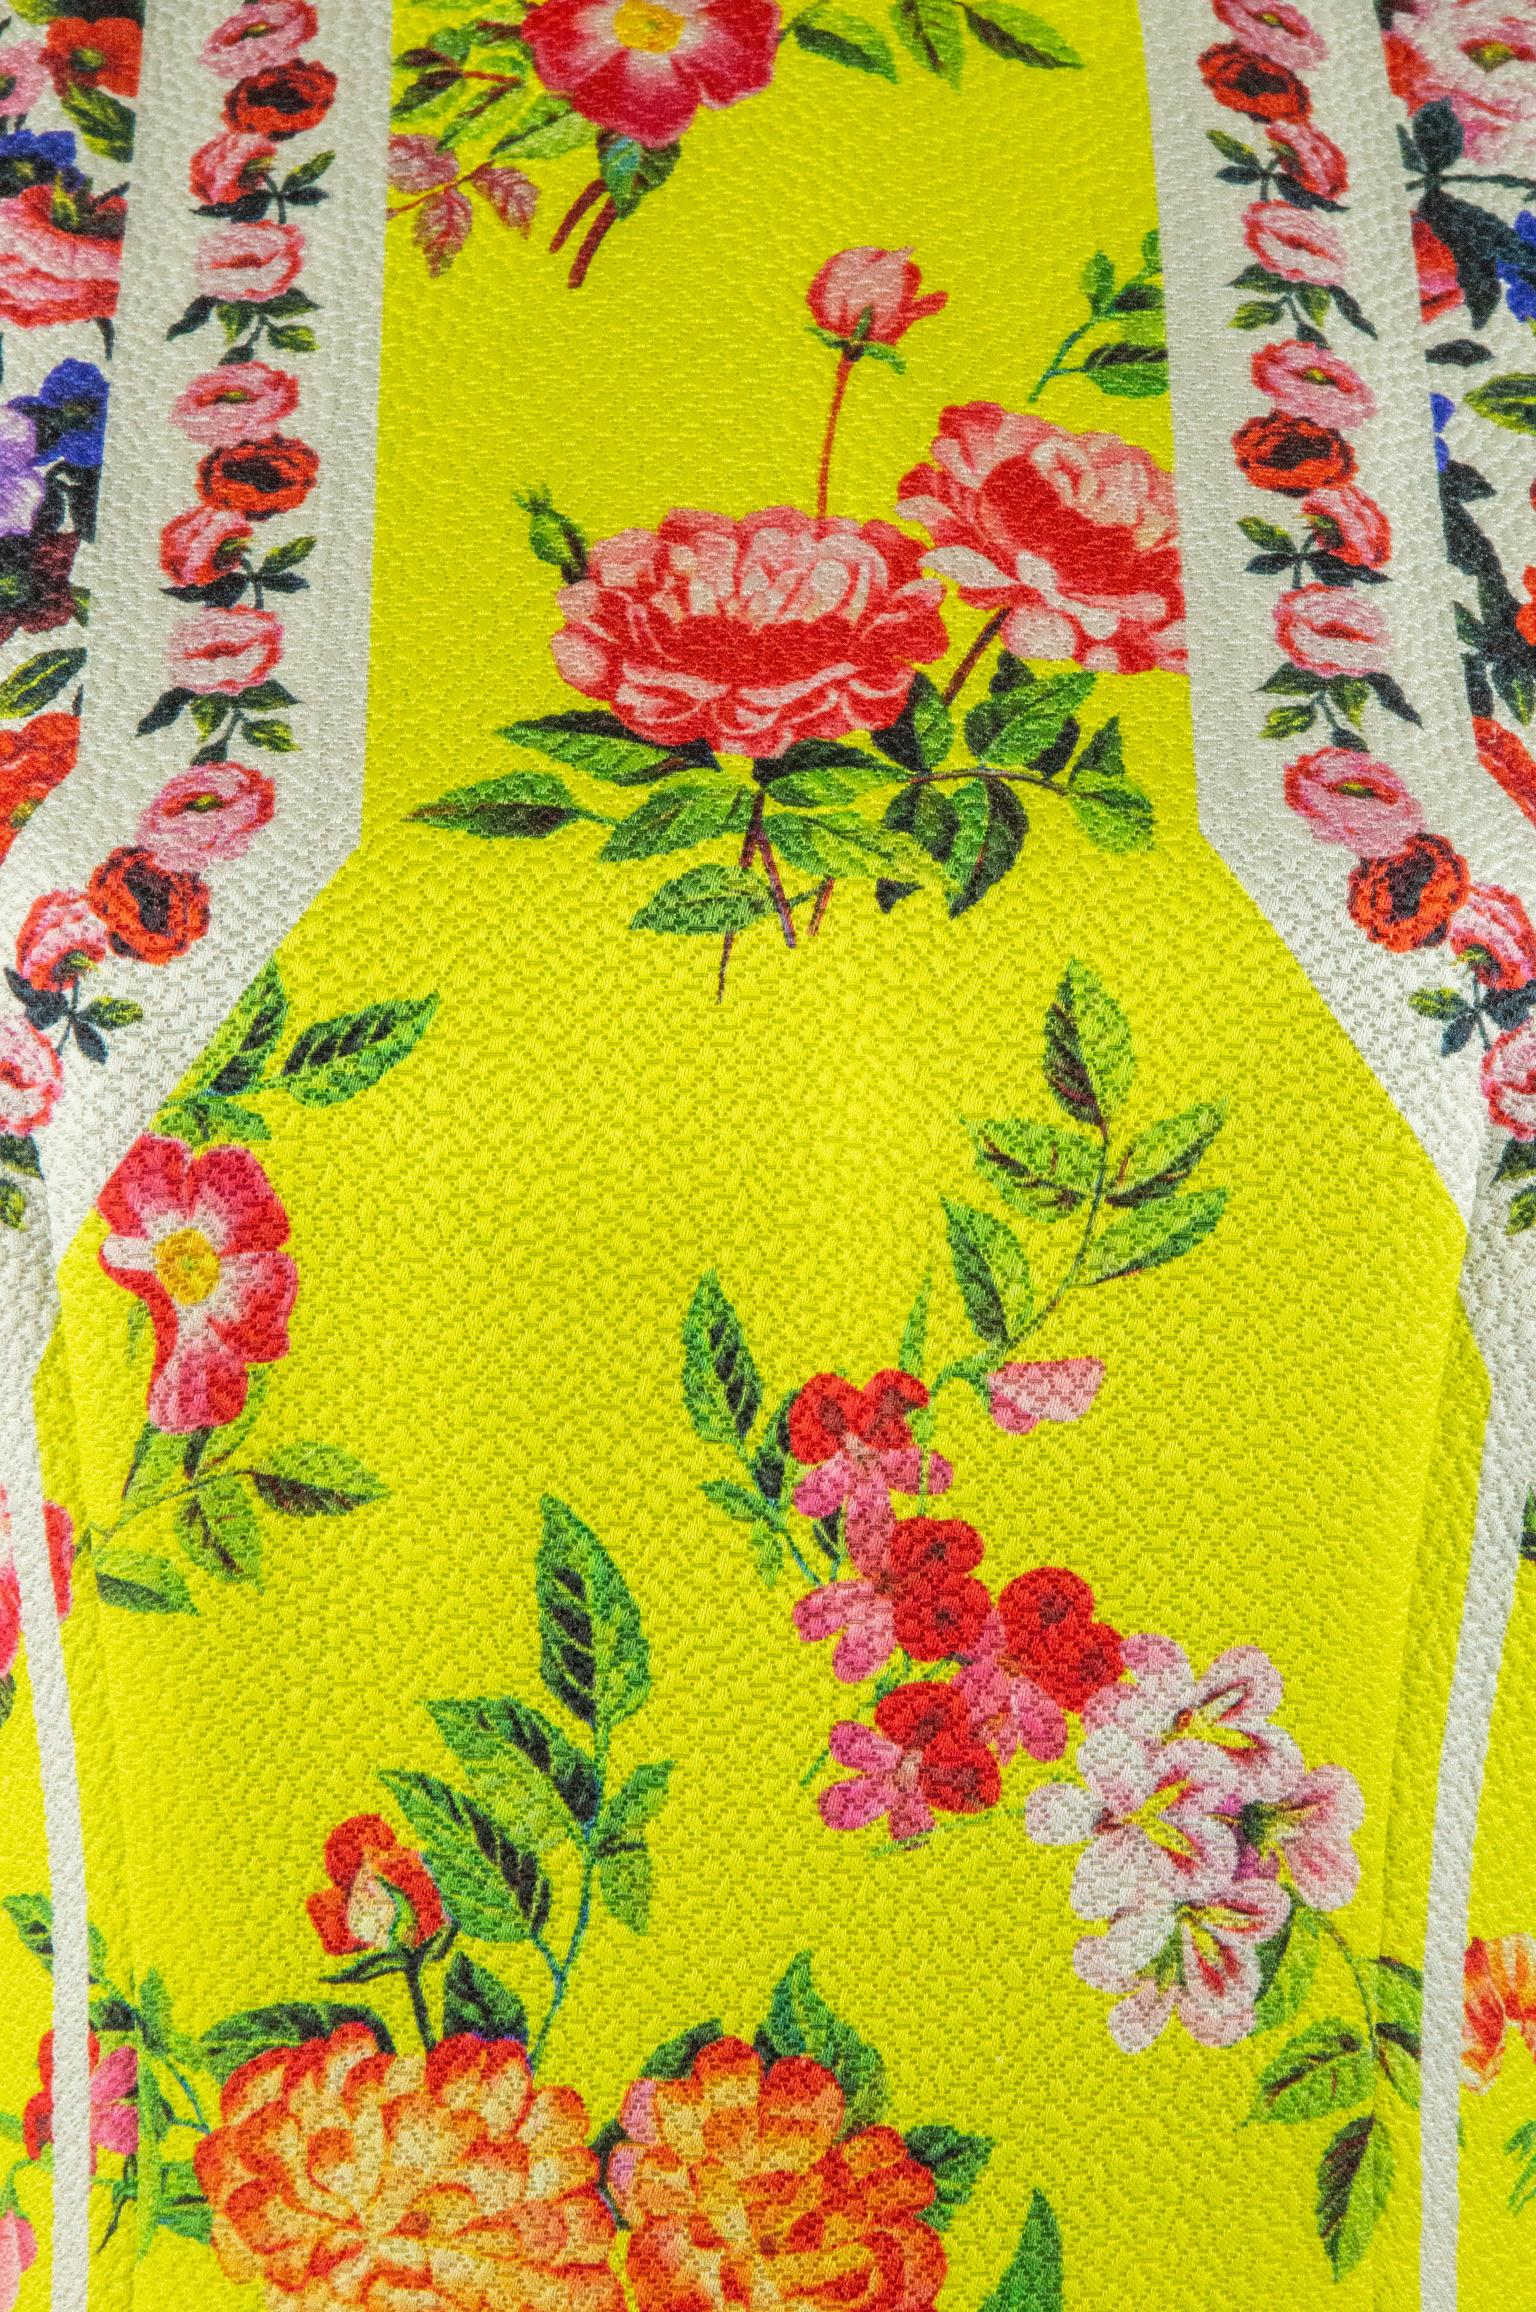 Mary Katrantzou Floral Patterned Skater Dress In Good Condition For Sale In London, GB